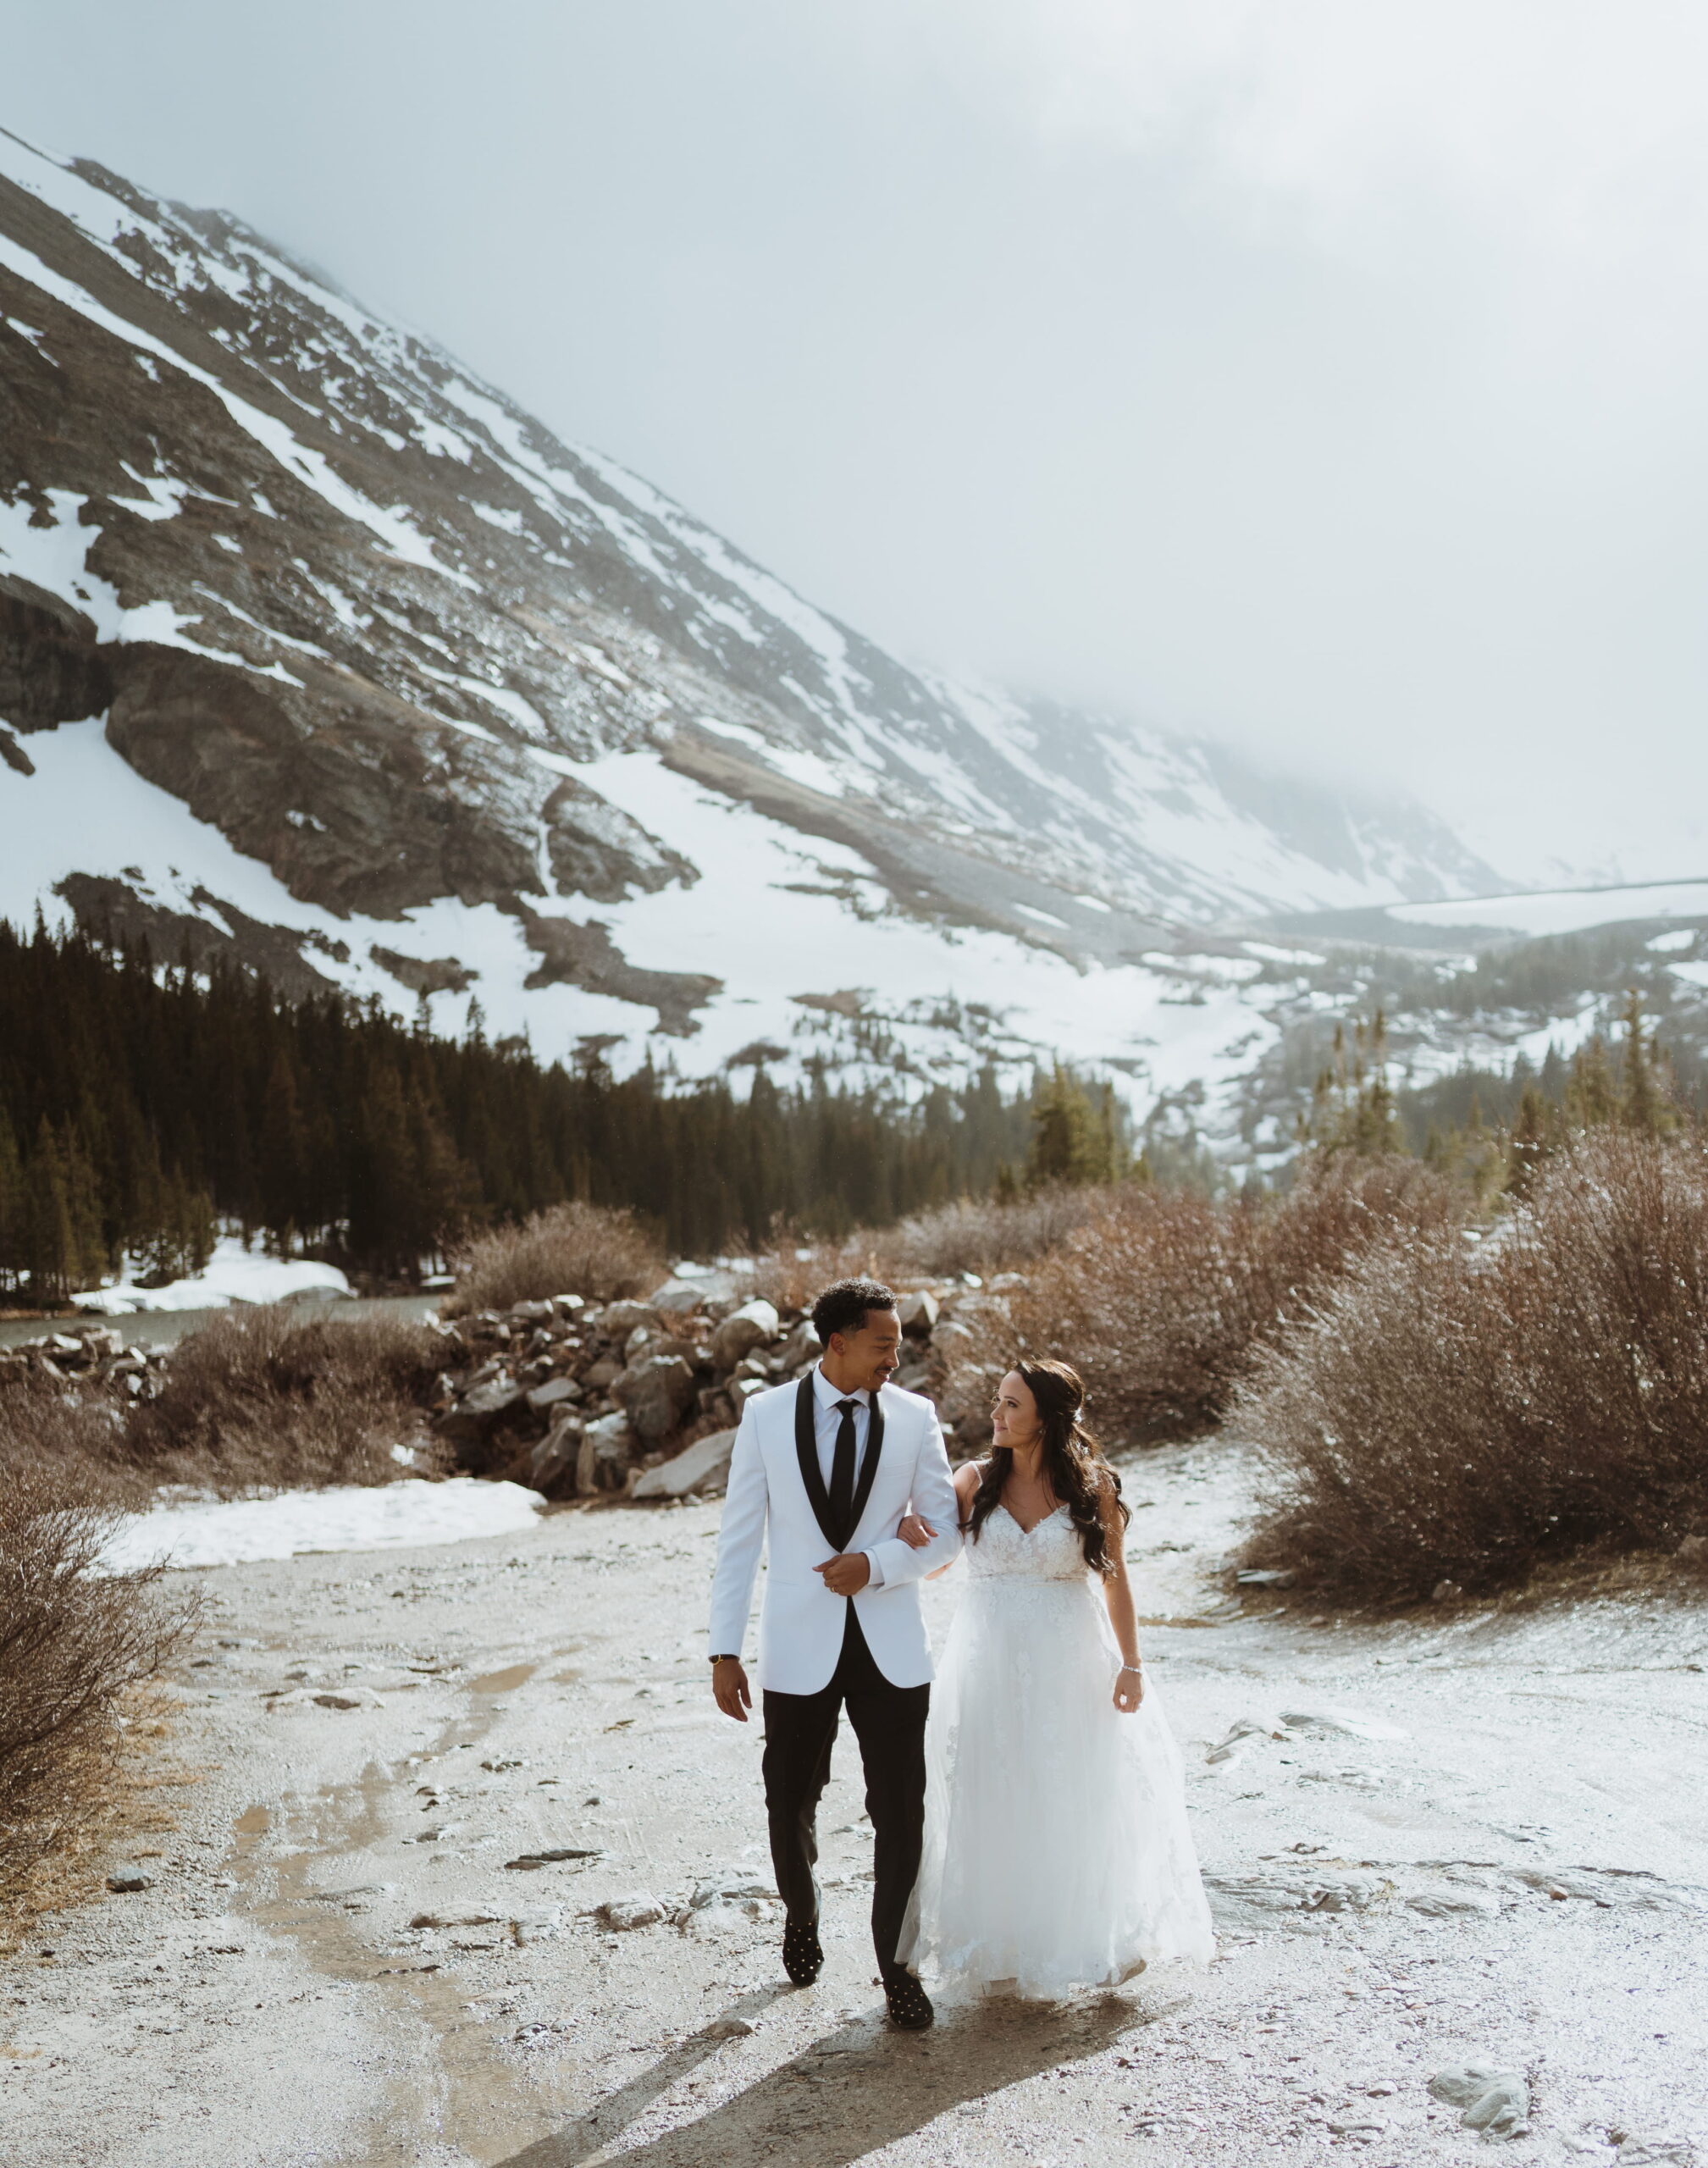 late spring elopement at blue lakes colorado. eloping in the rockies. planning your adventure wedding in colorado. breckenridge elopement.